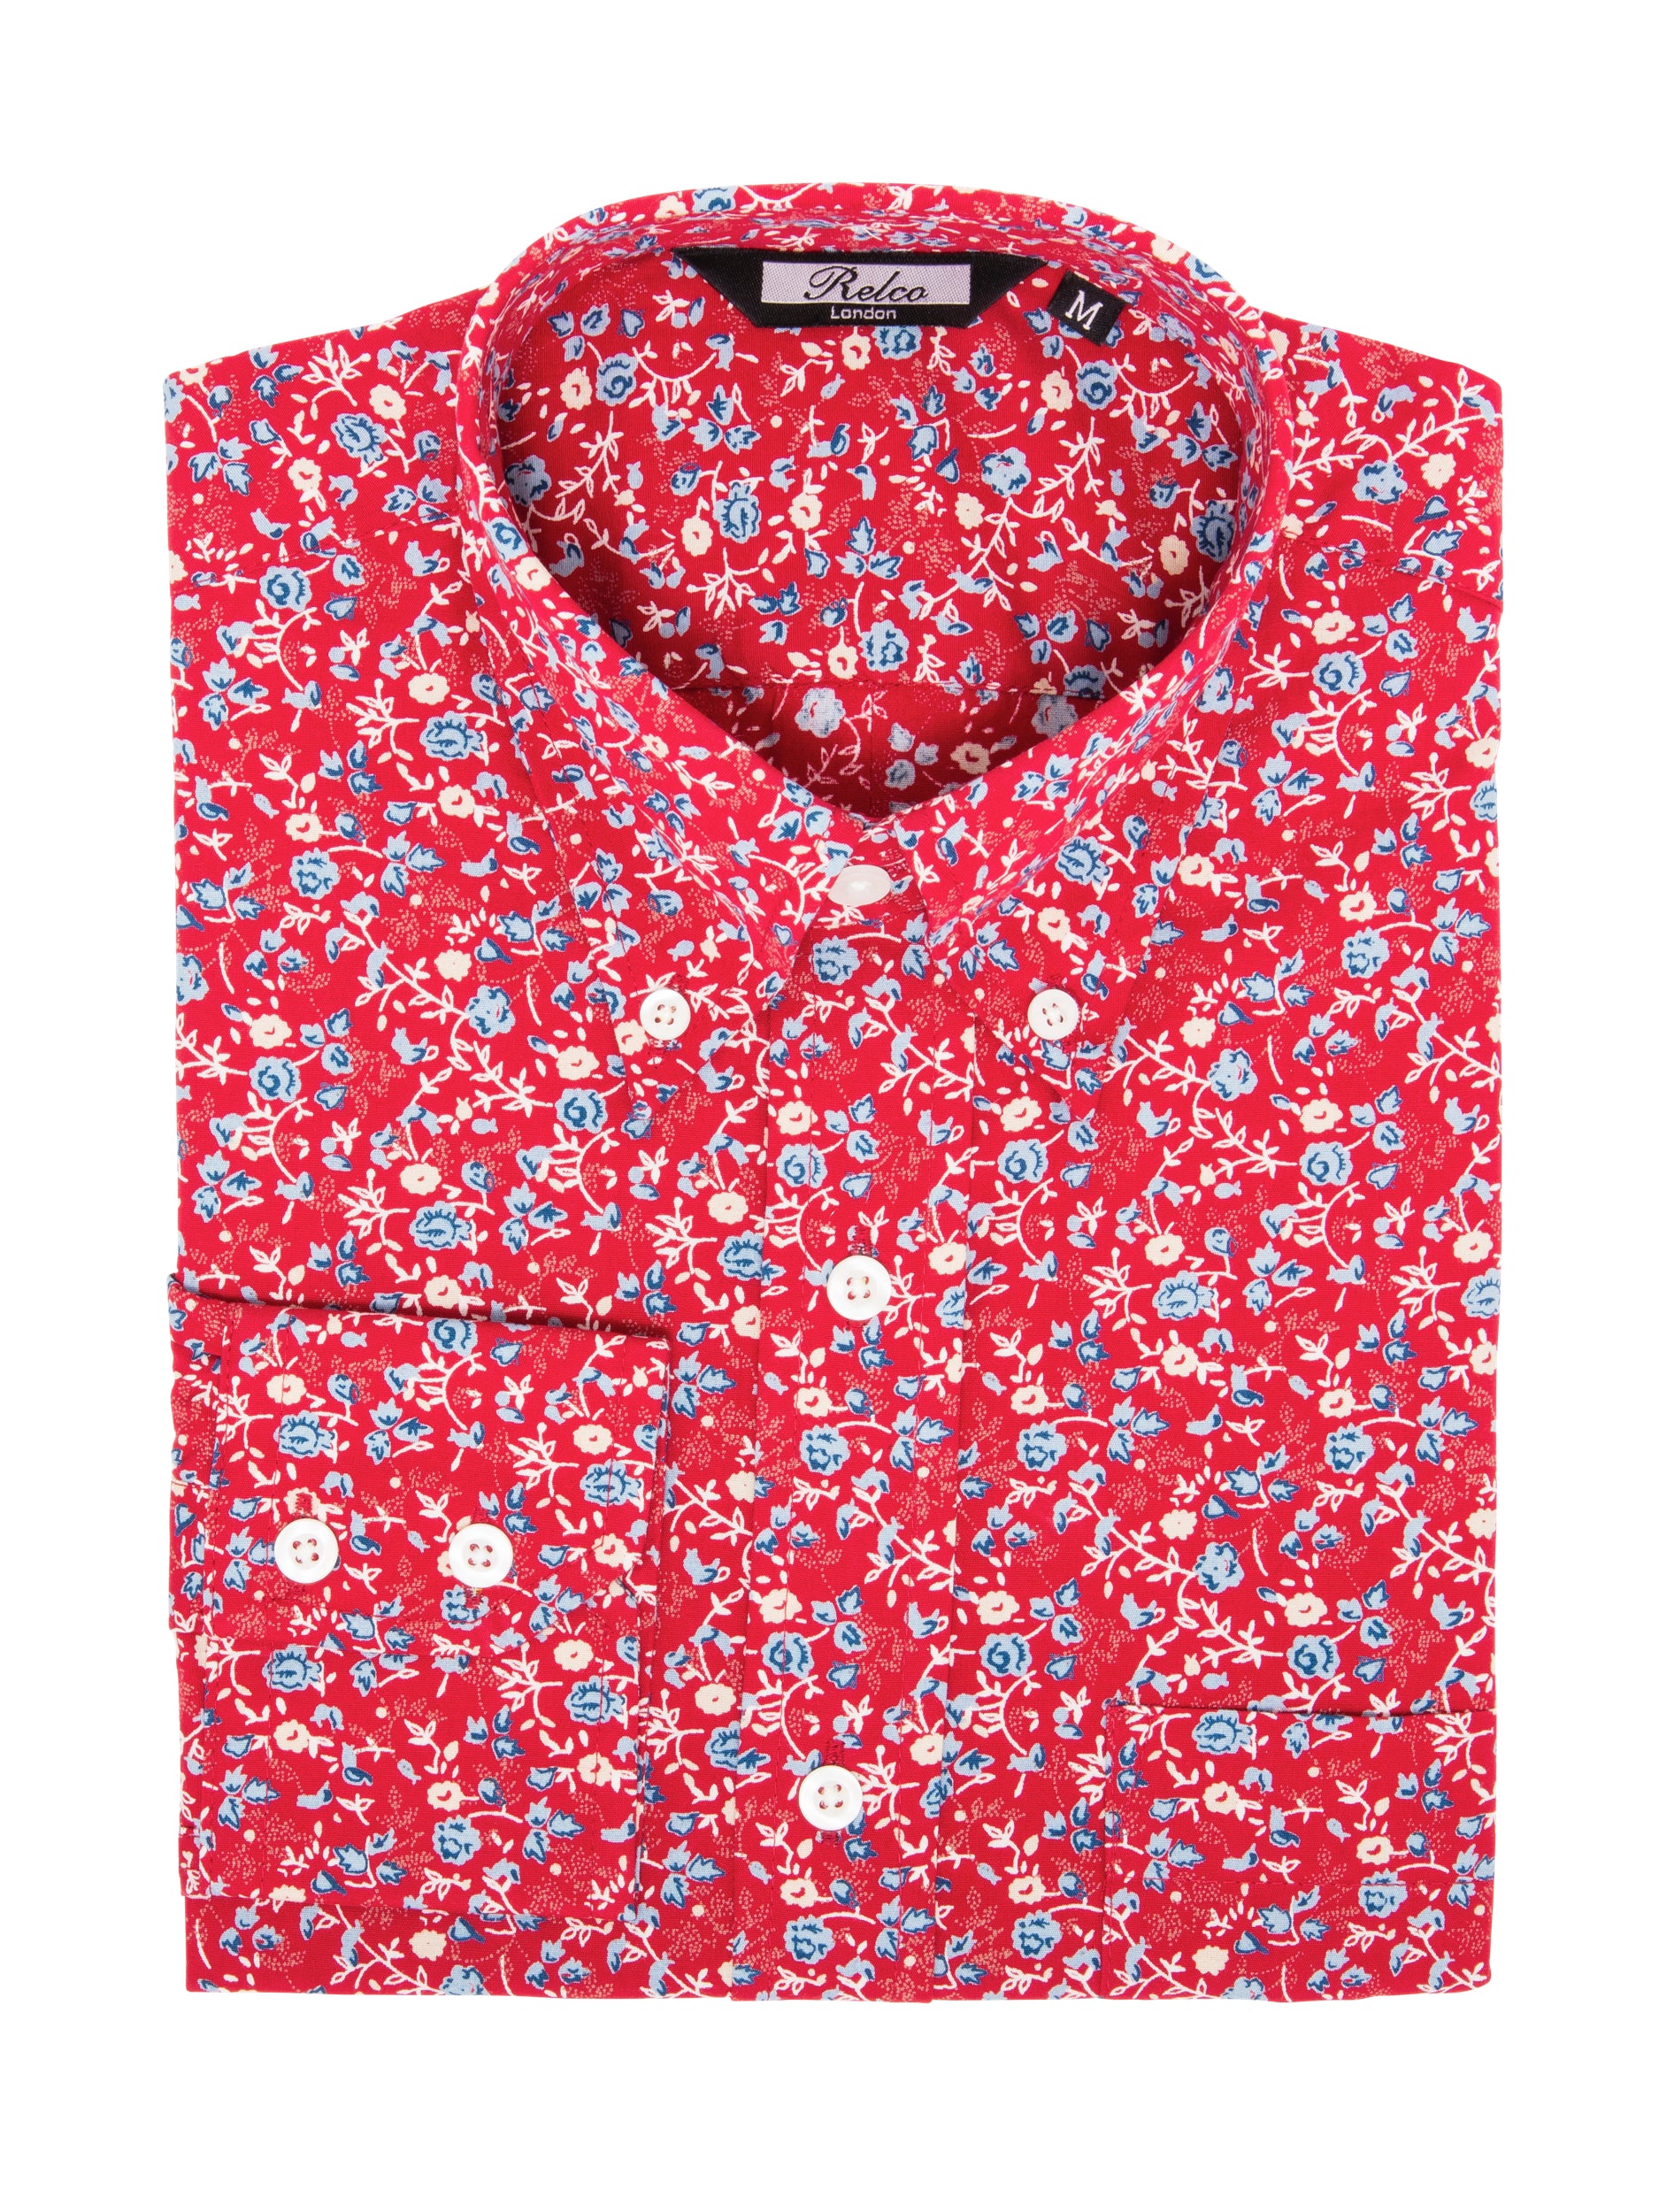 Red Cotton Floral Vintage Men's Shirt | Retro Clothing | Relco London